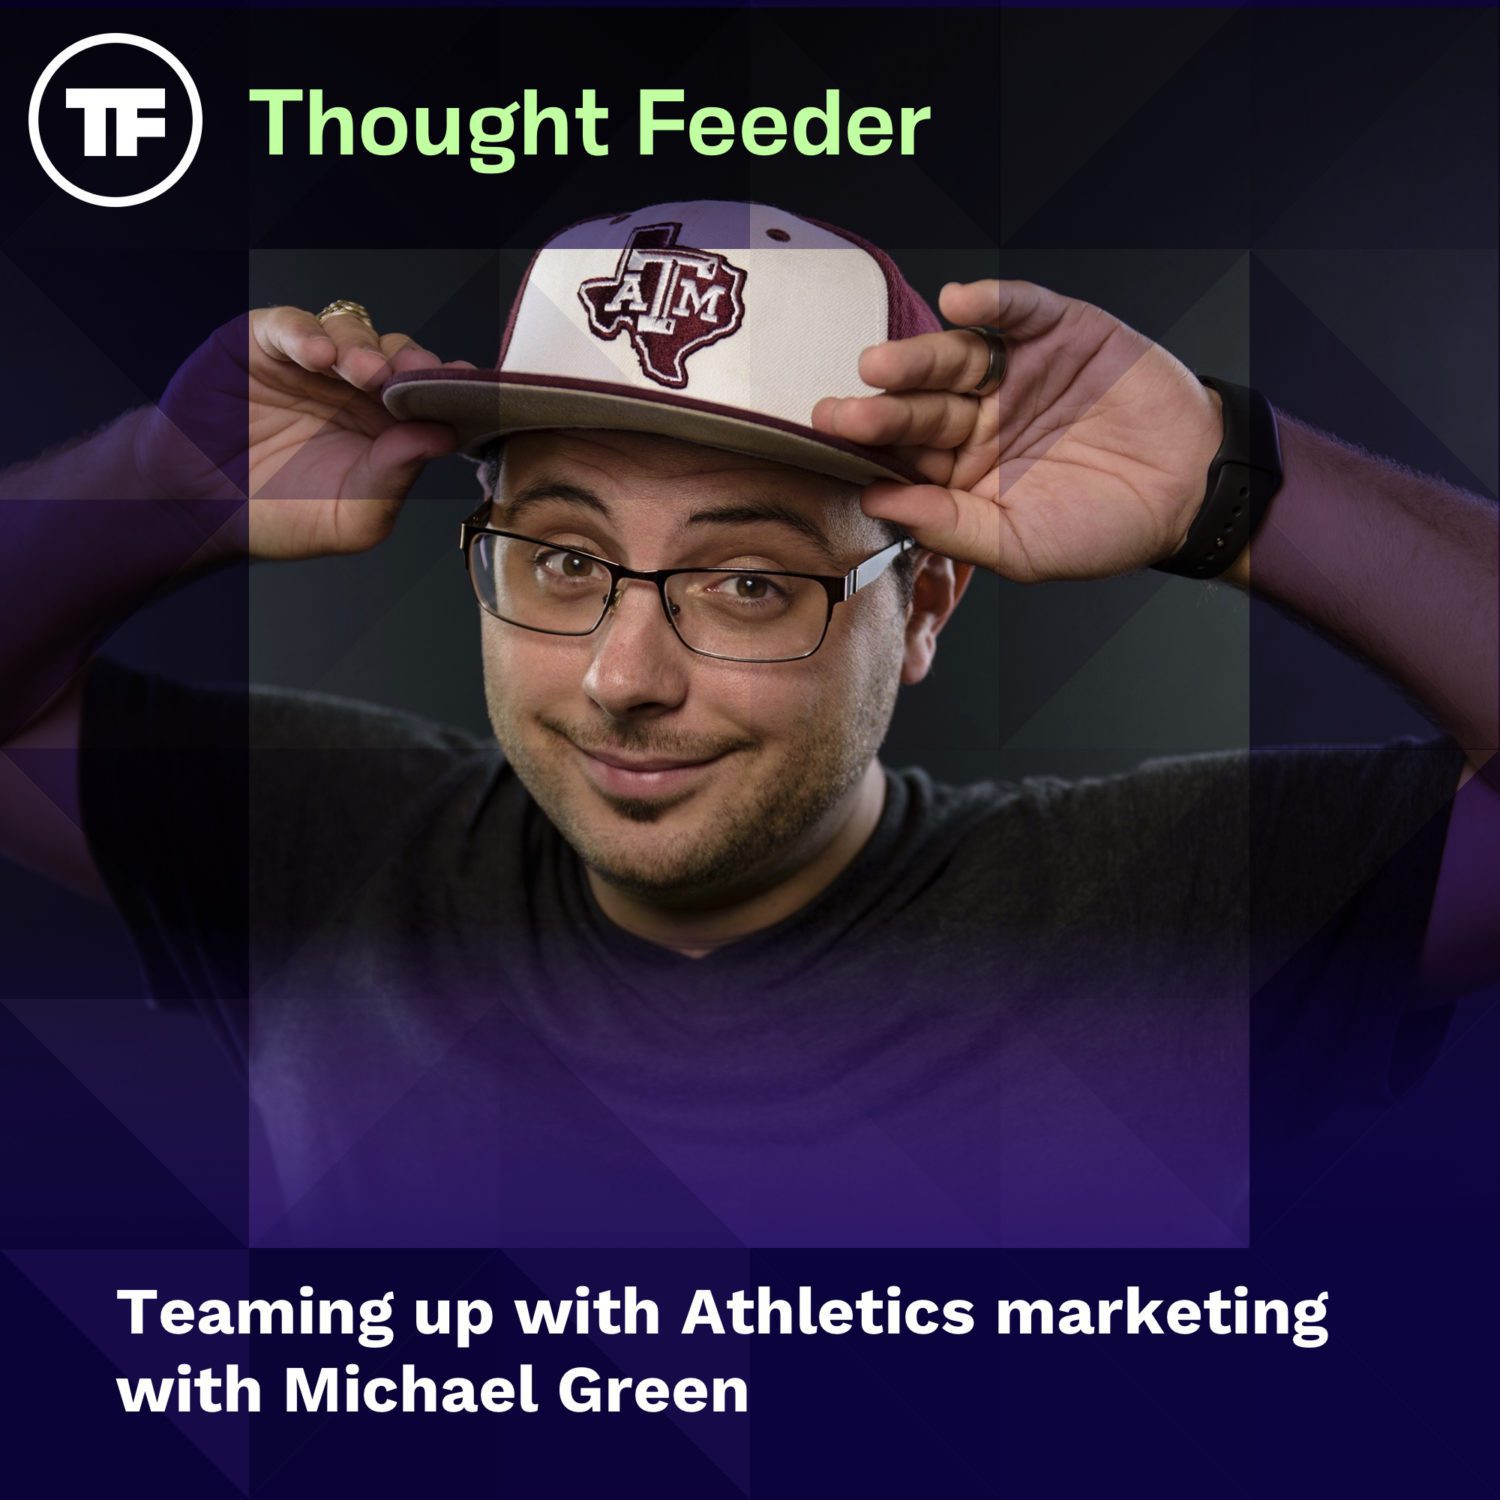 Teaming up with Athletics Marketing with Michael Green